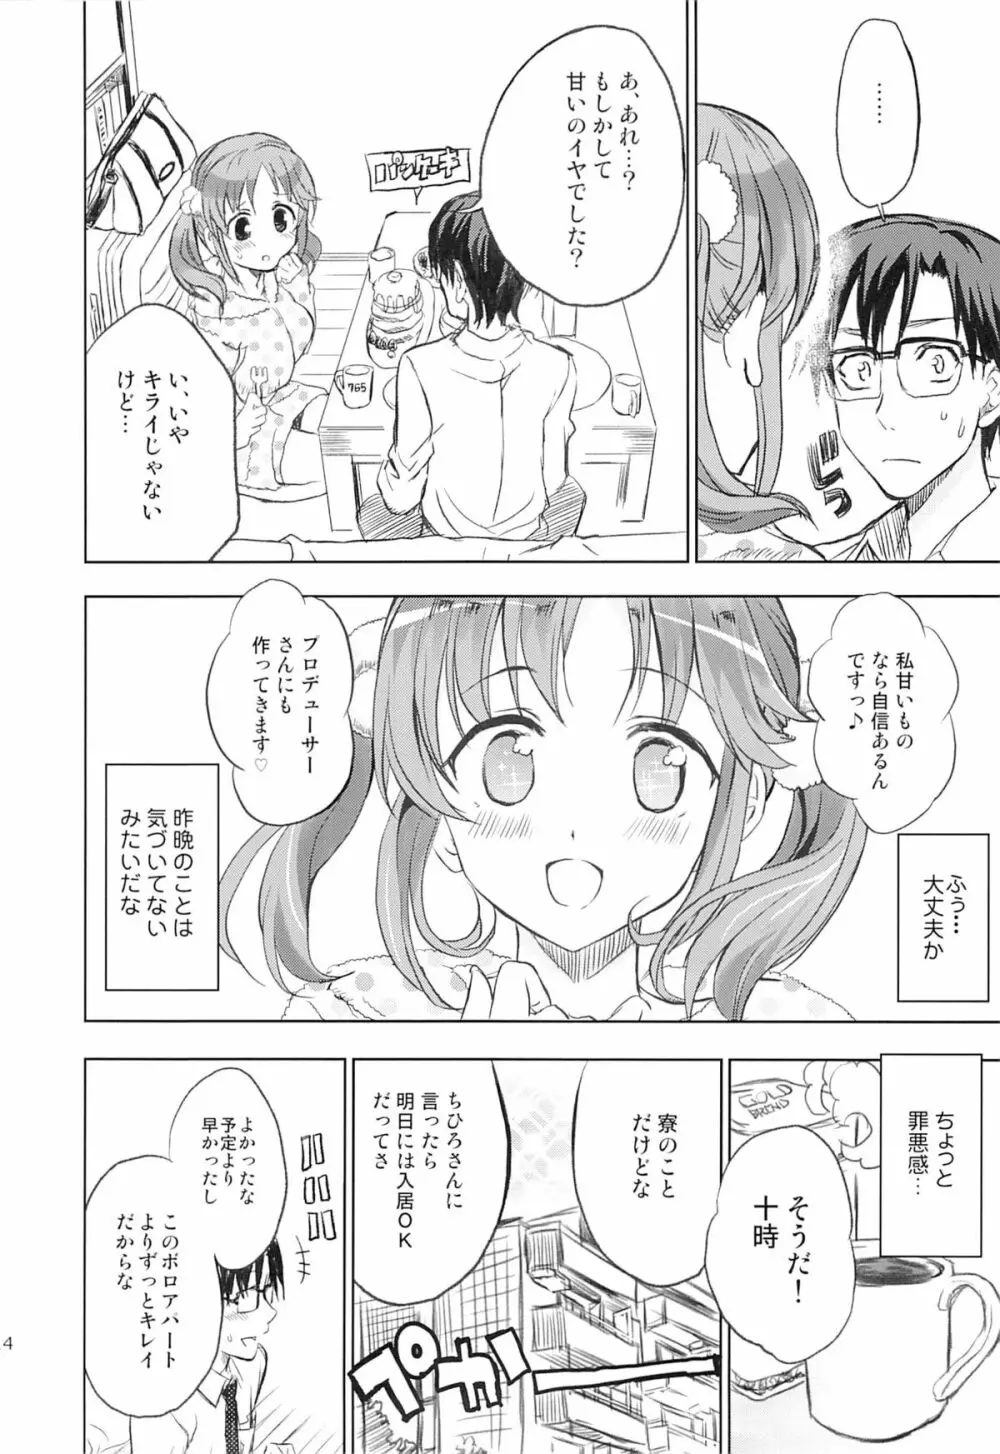 Passion Fruit Girls #十時愛梨 プリンセスバニーは眠らない。 Page.13